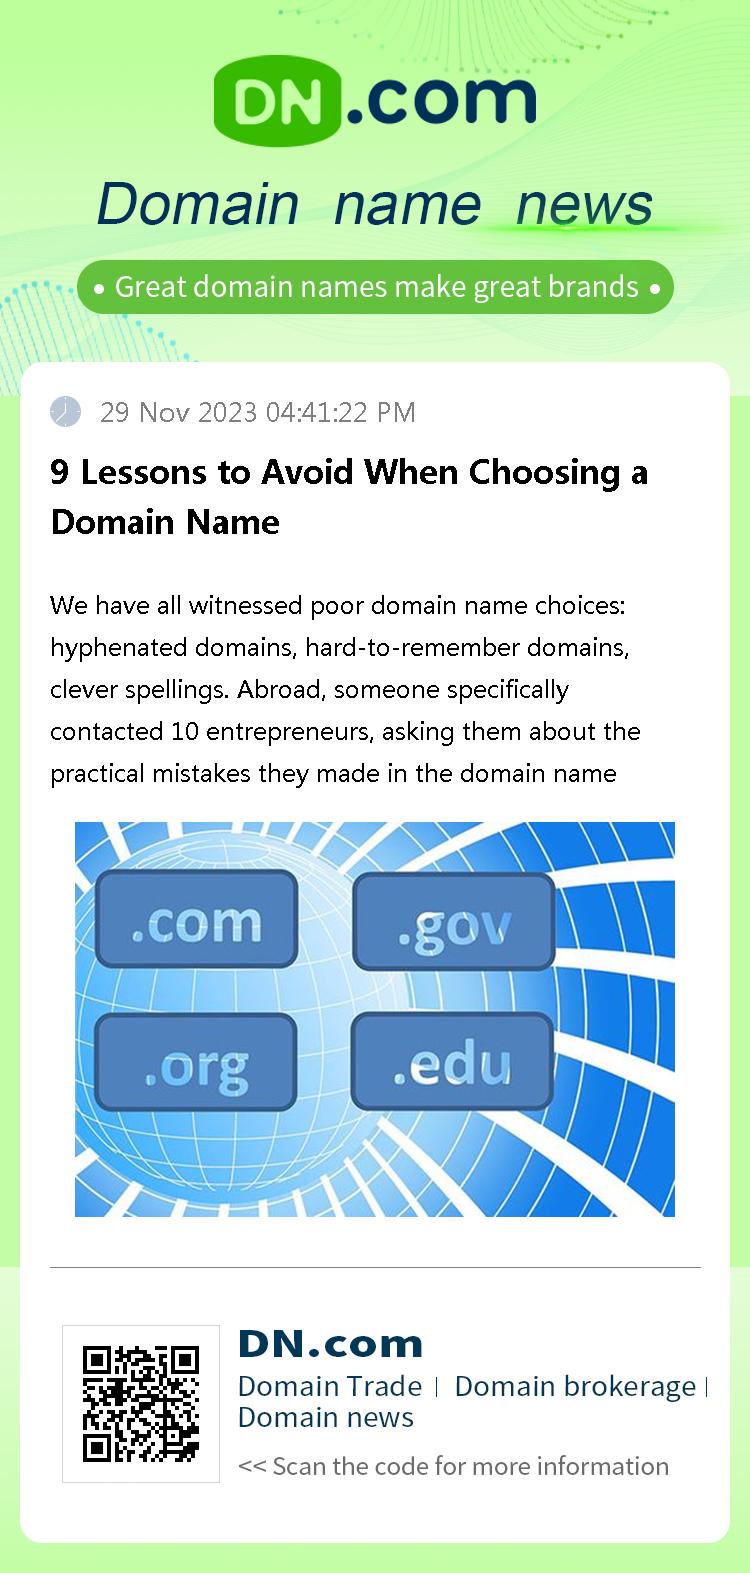 9 Lessons to Avoid When Choosing a Domain Name